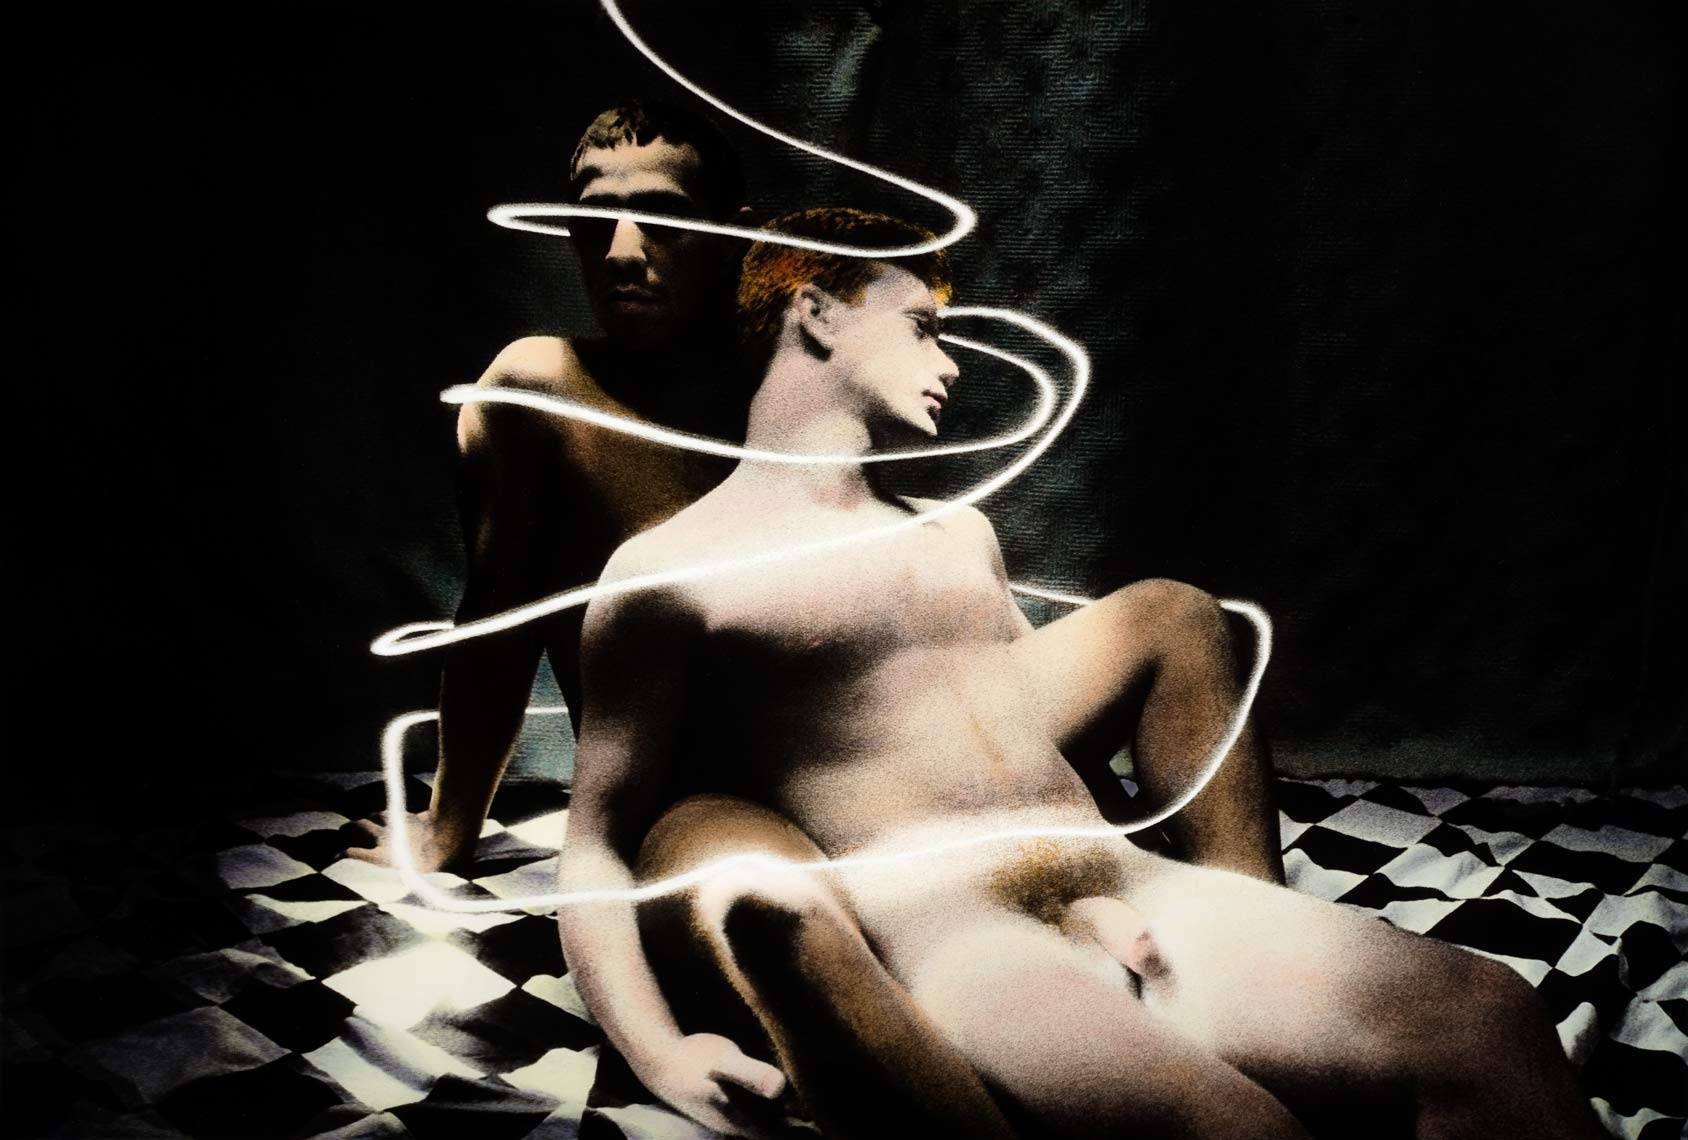 David Lebe; Spiral, 1987, male nude, light drawing, hand colored photograph